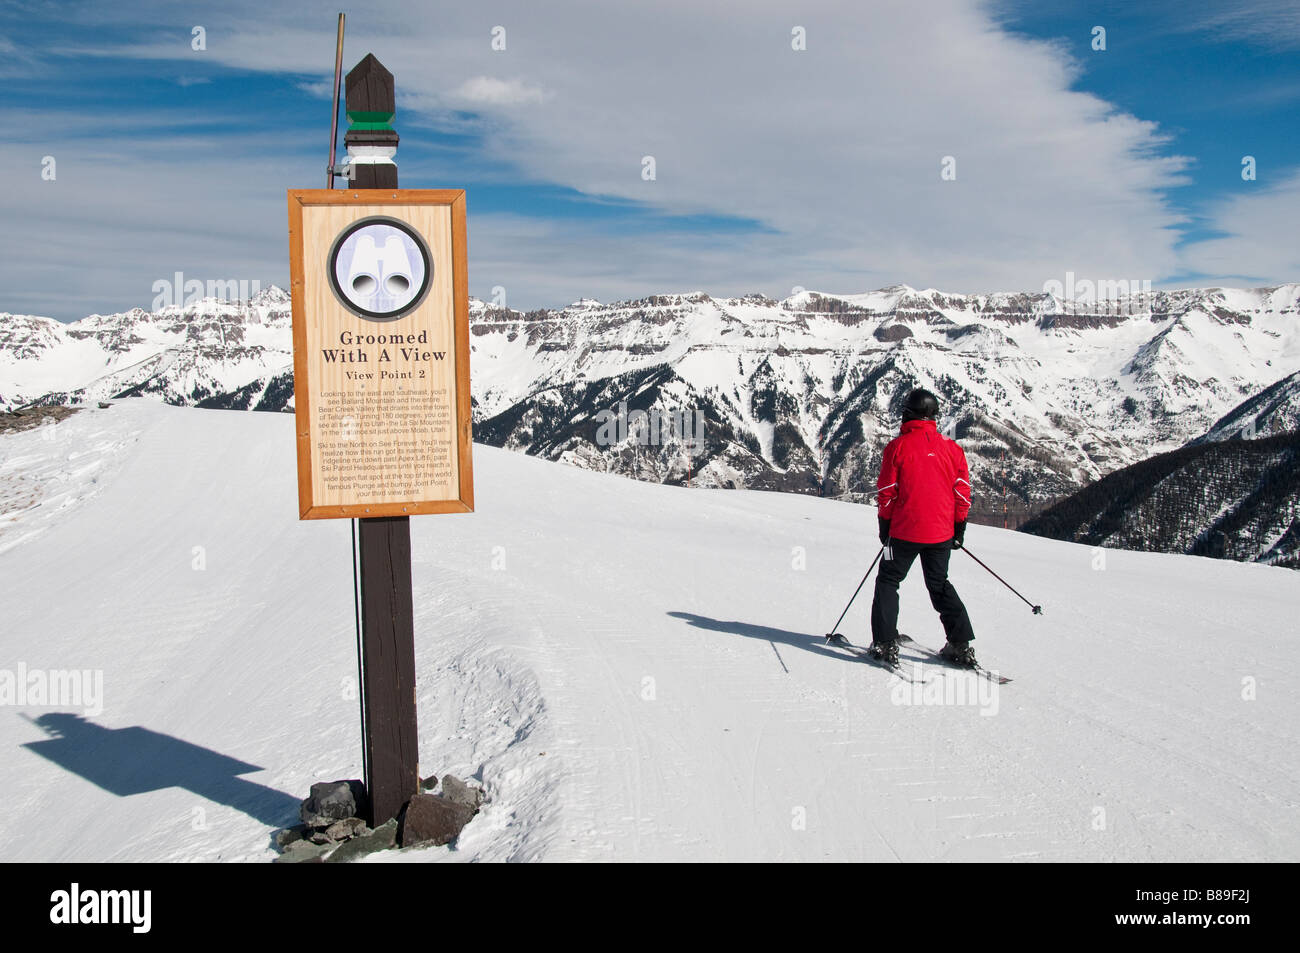 Groomed with a view, View Point 2 sign, Telluride Ski Resort. Telluride, Colorado. Stock Photo